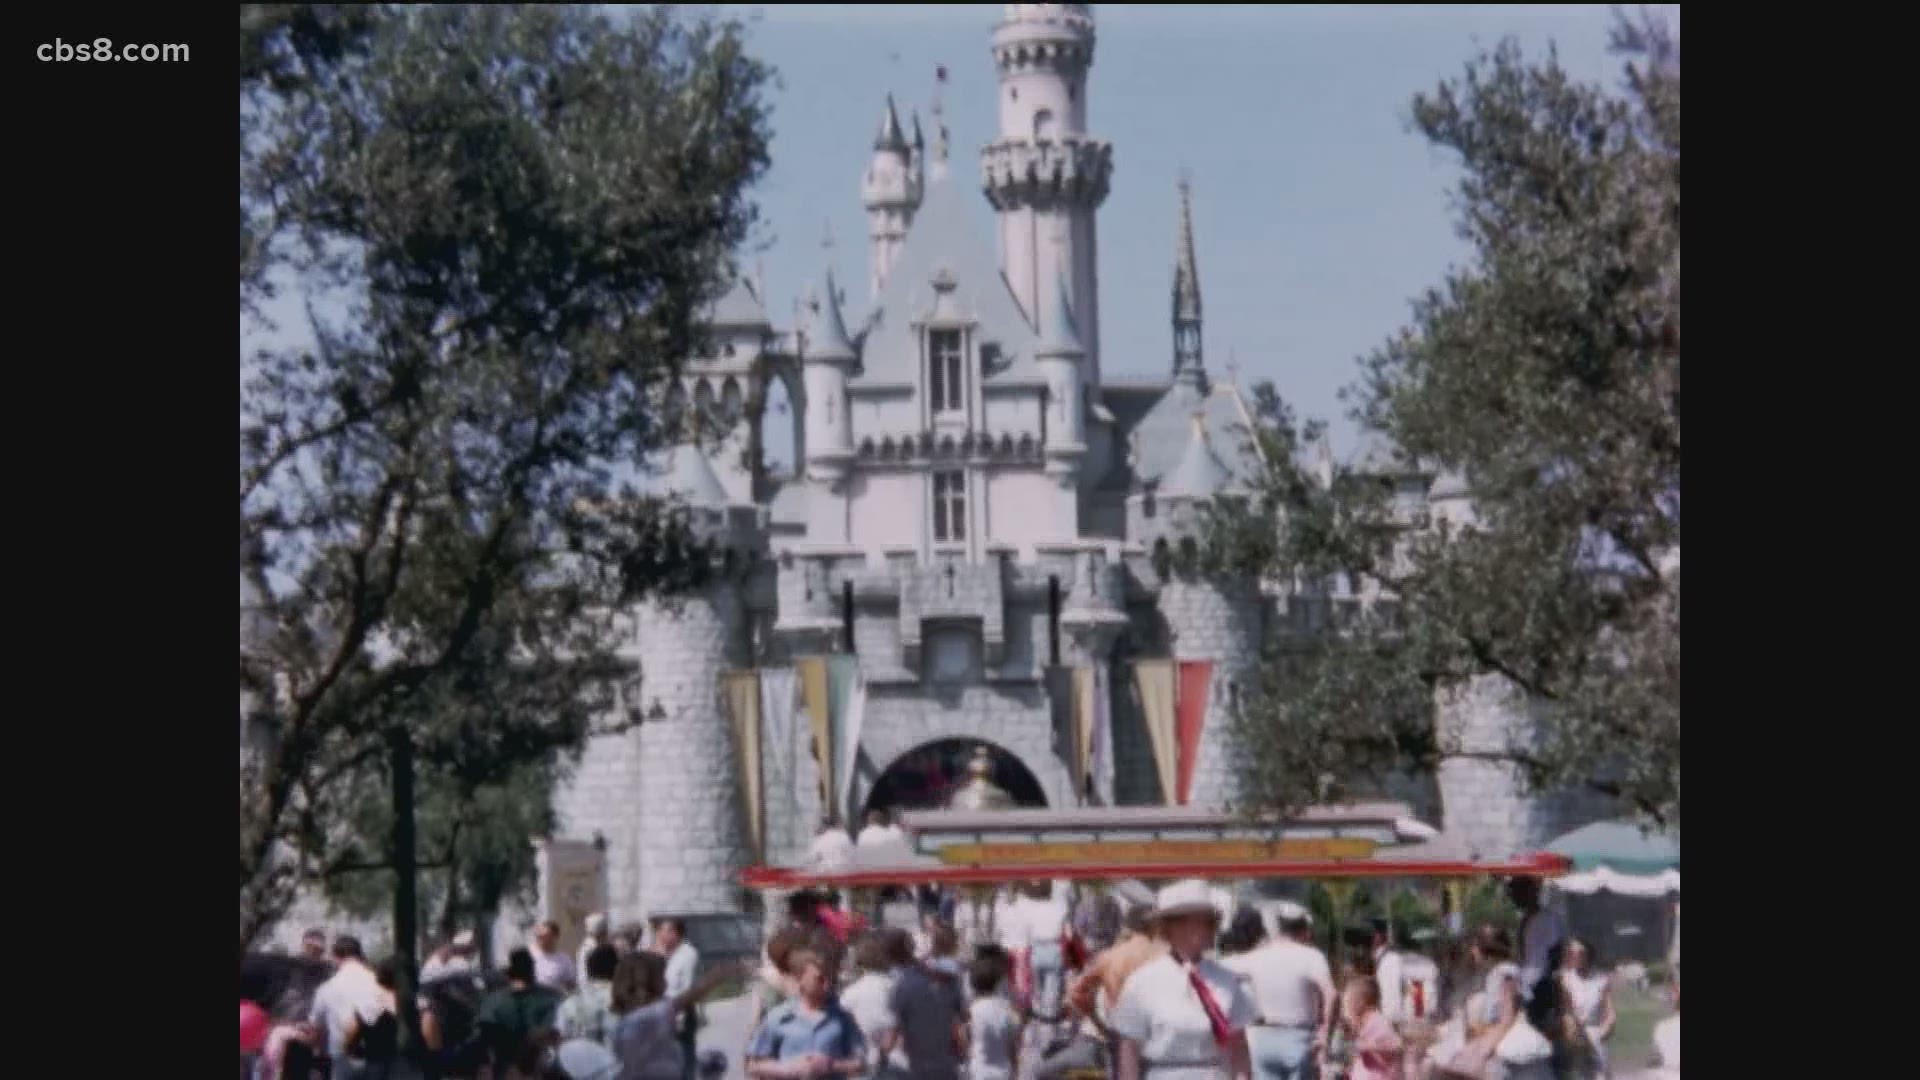 This News 8 archive footage of Disneyland's opening day on July 17, 1955 hasn't been seen in 66 years!